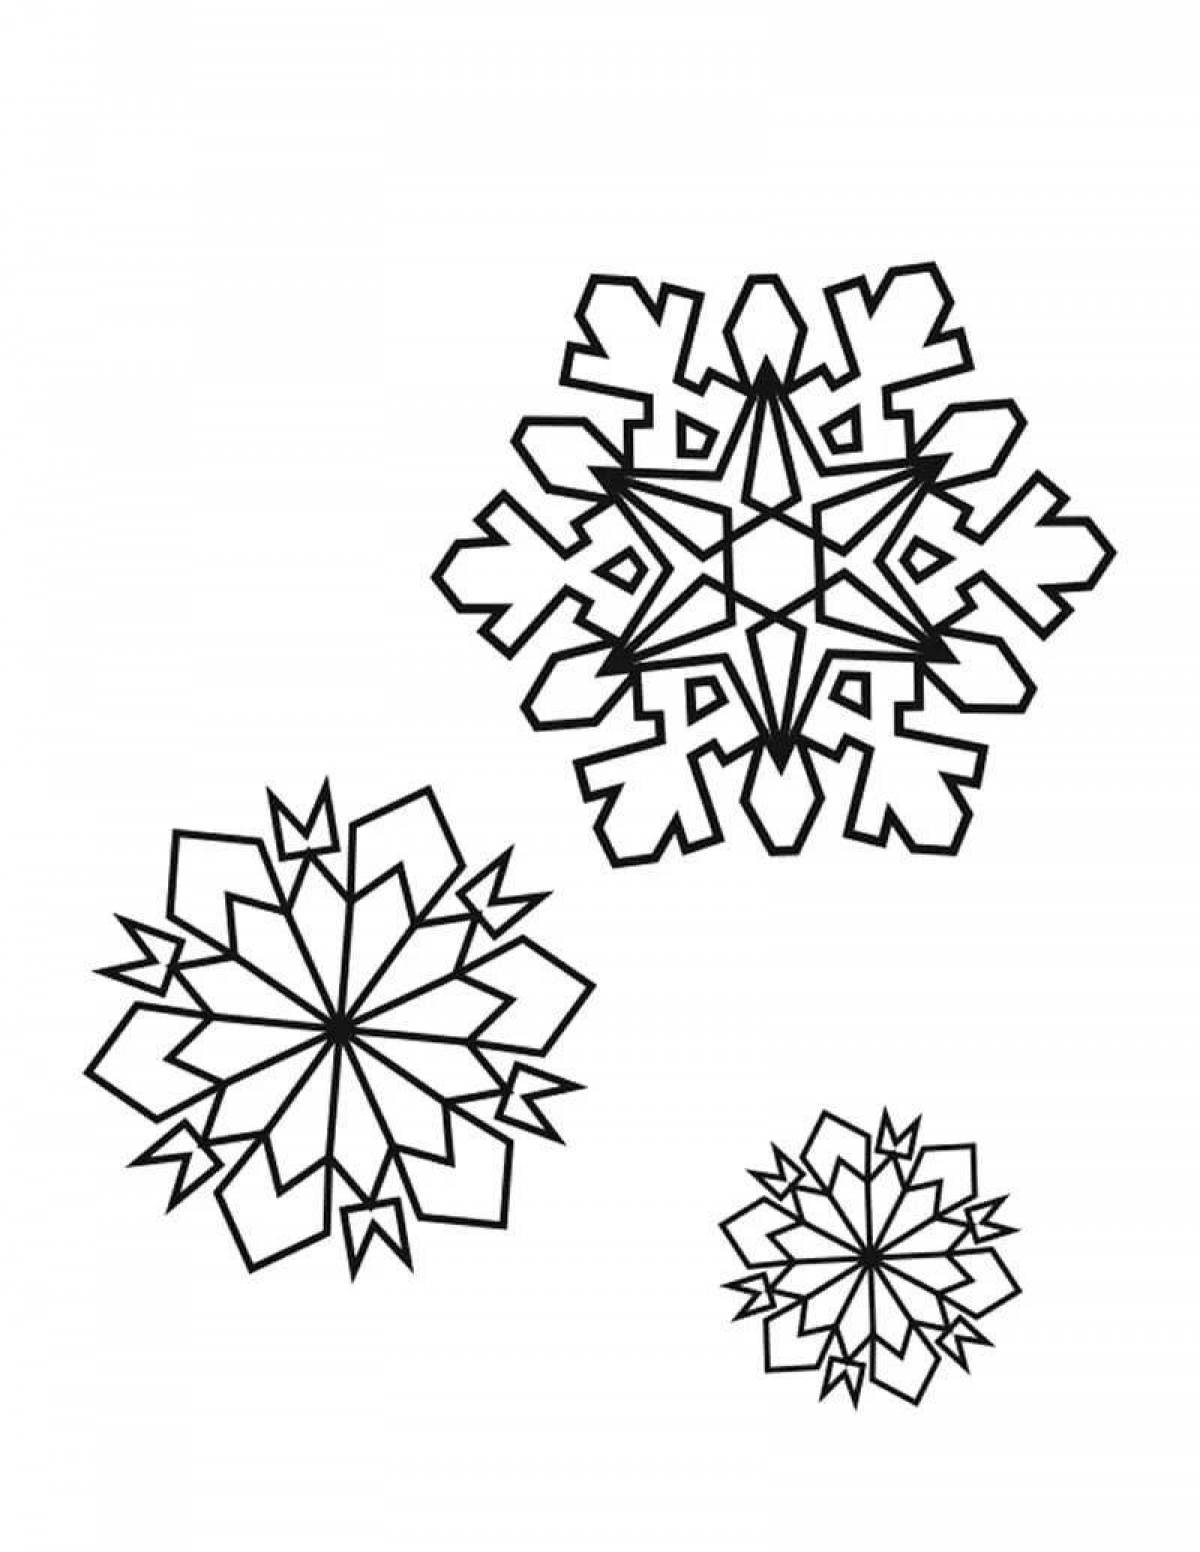 Awesome snowflake coloring book